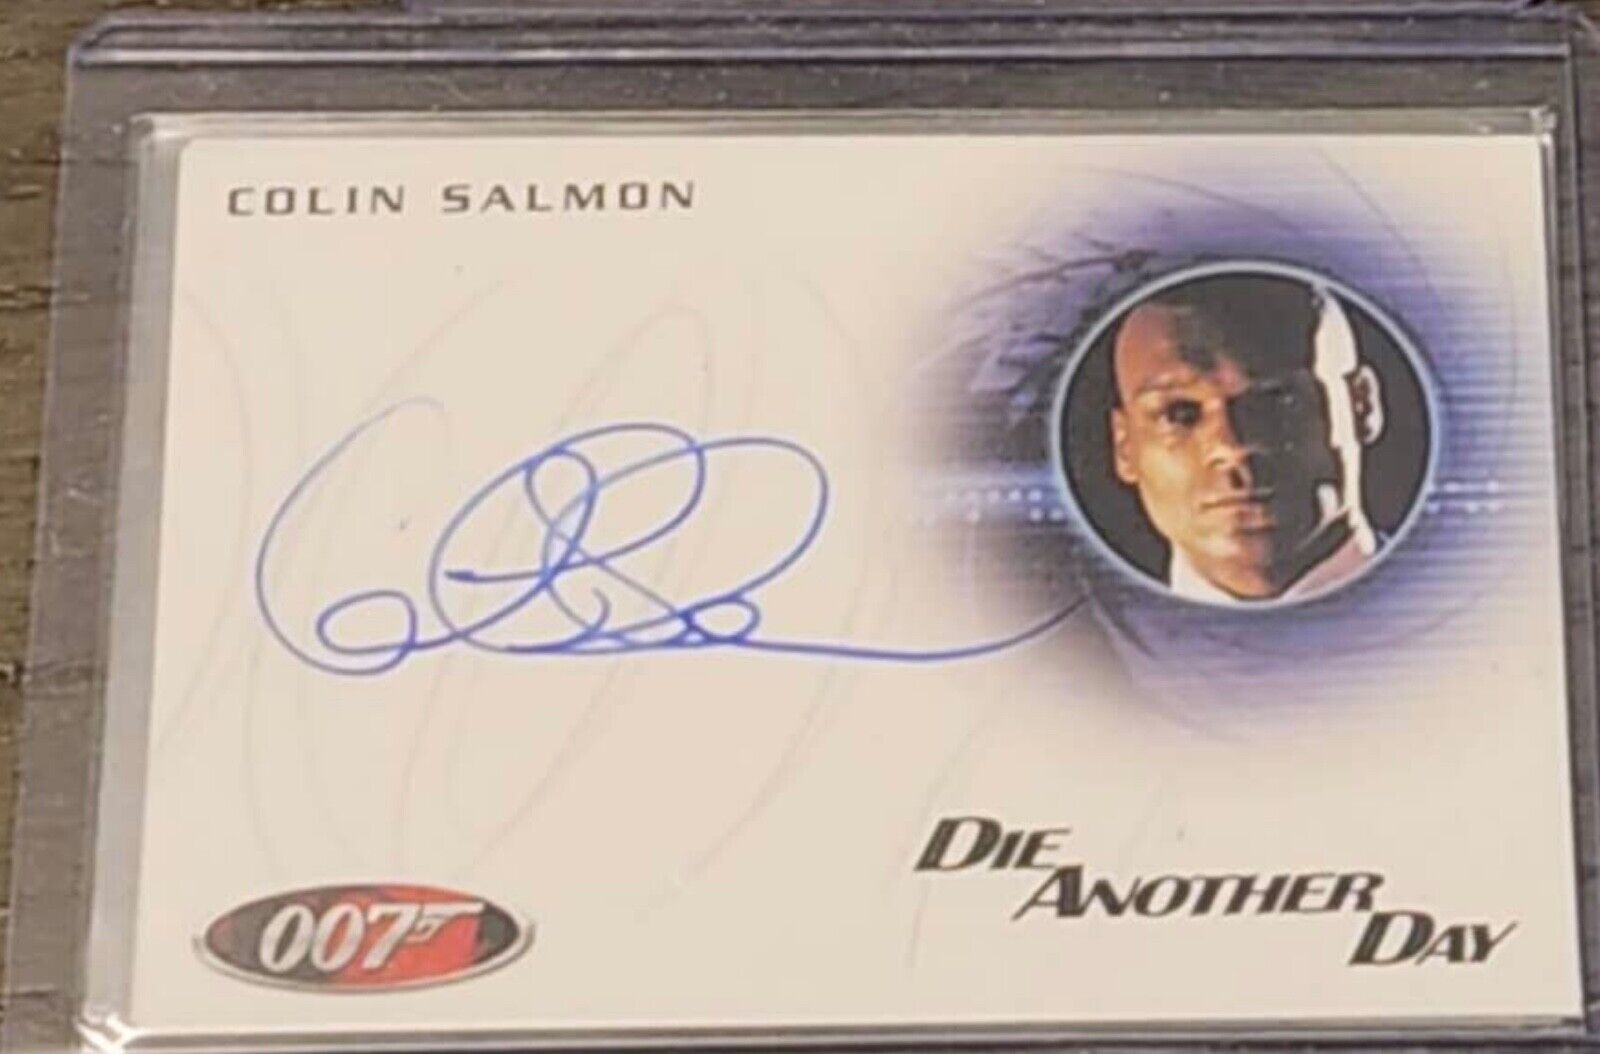 James Bond colin salmon die another day autograph